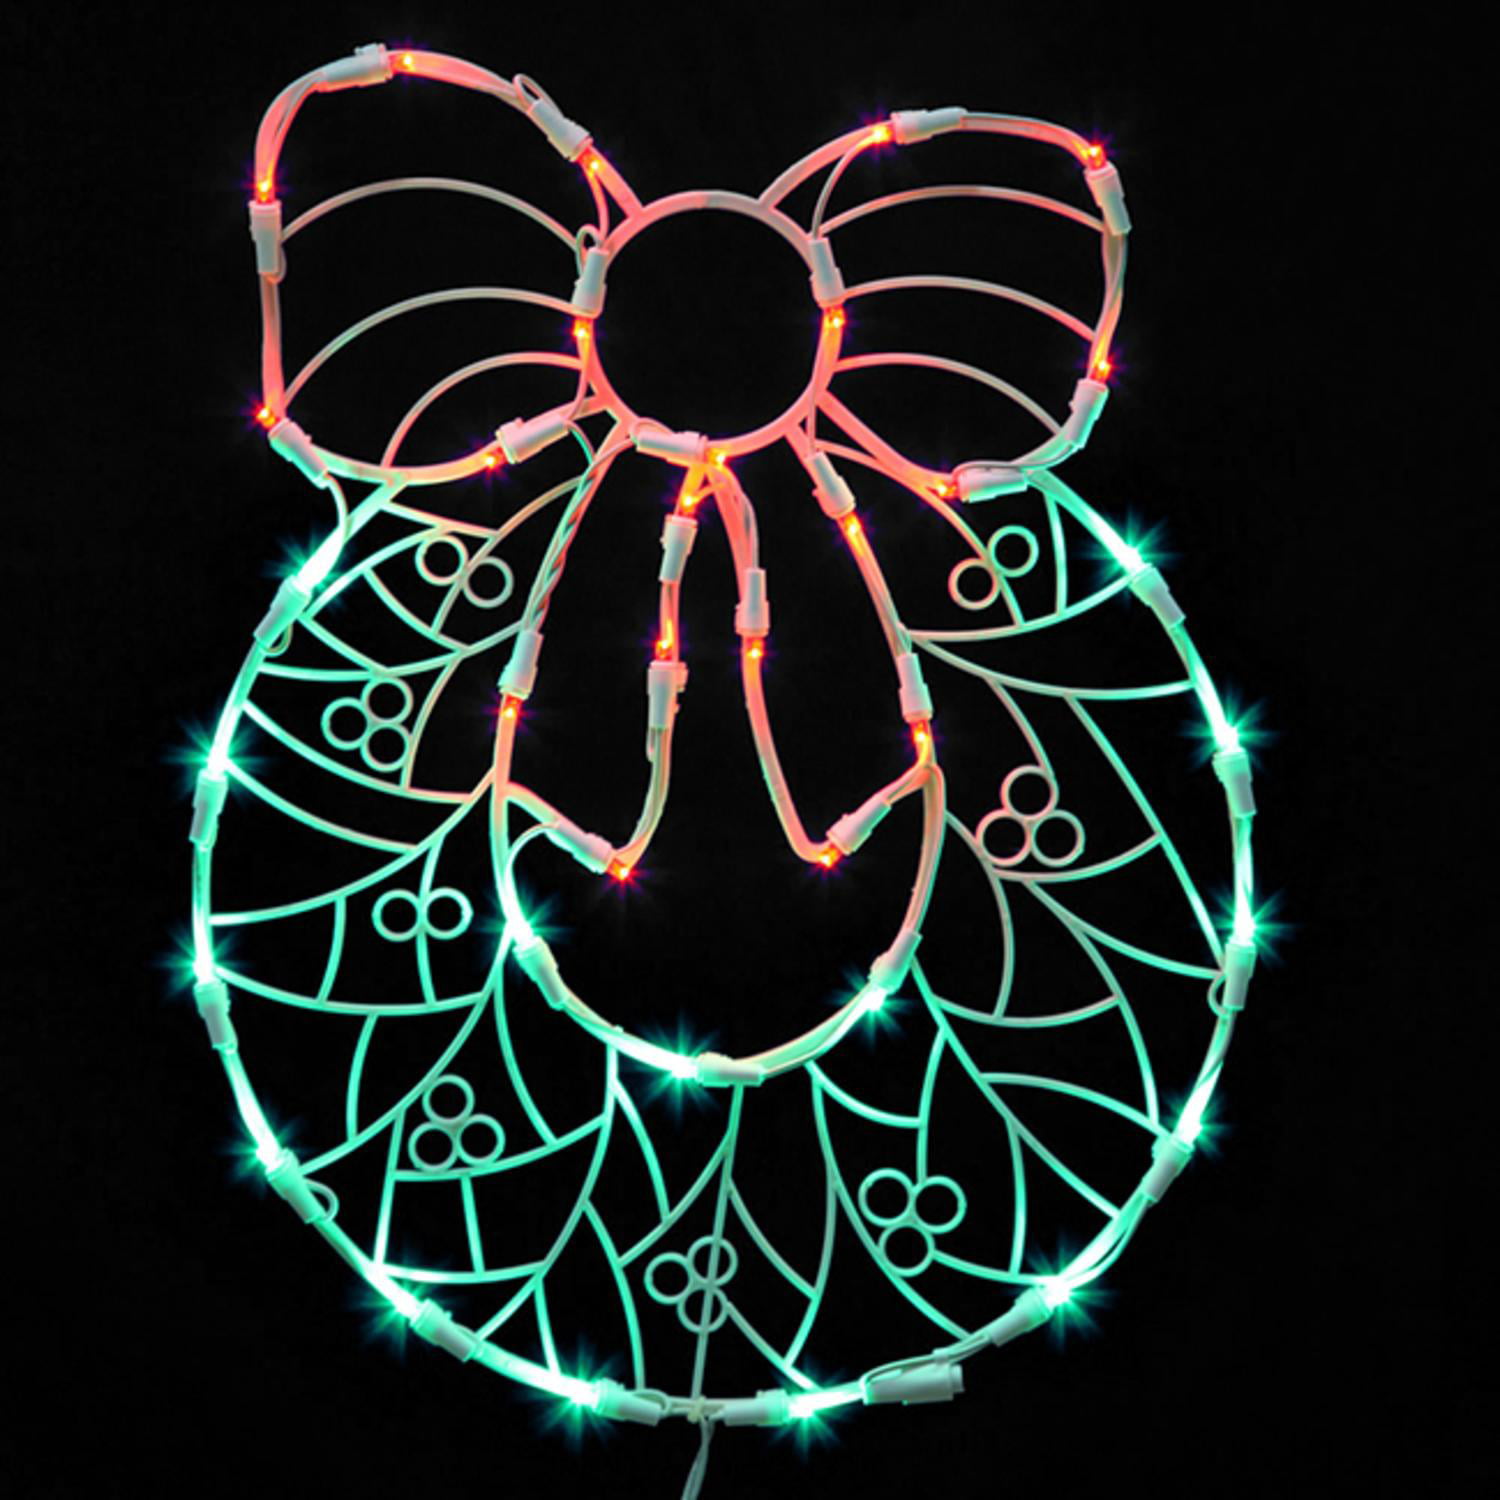 17" Lighted LED Wreath with Bow Christmas Window Silhouette Decoration